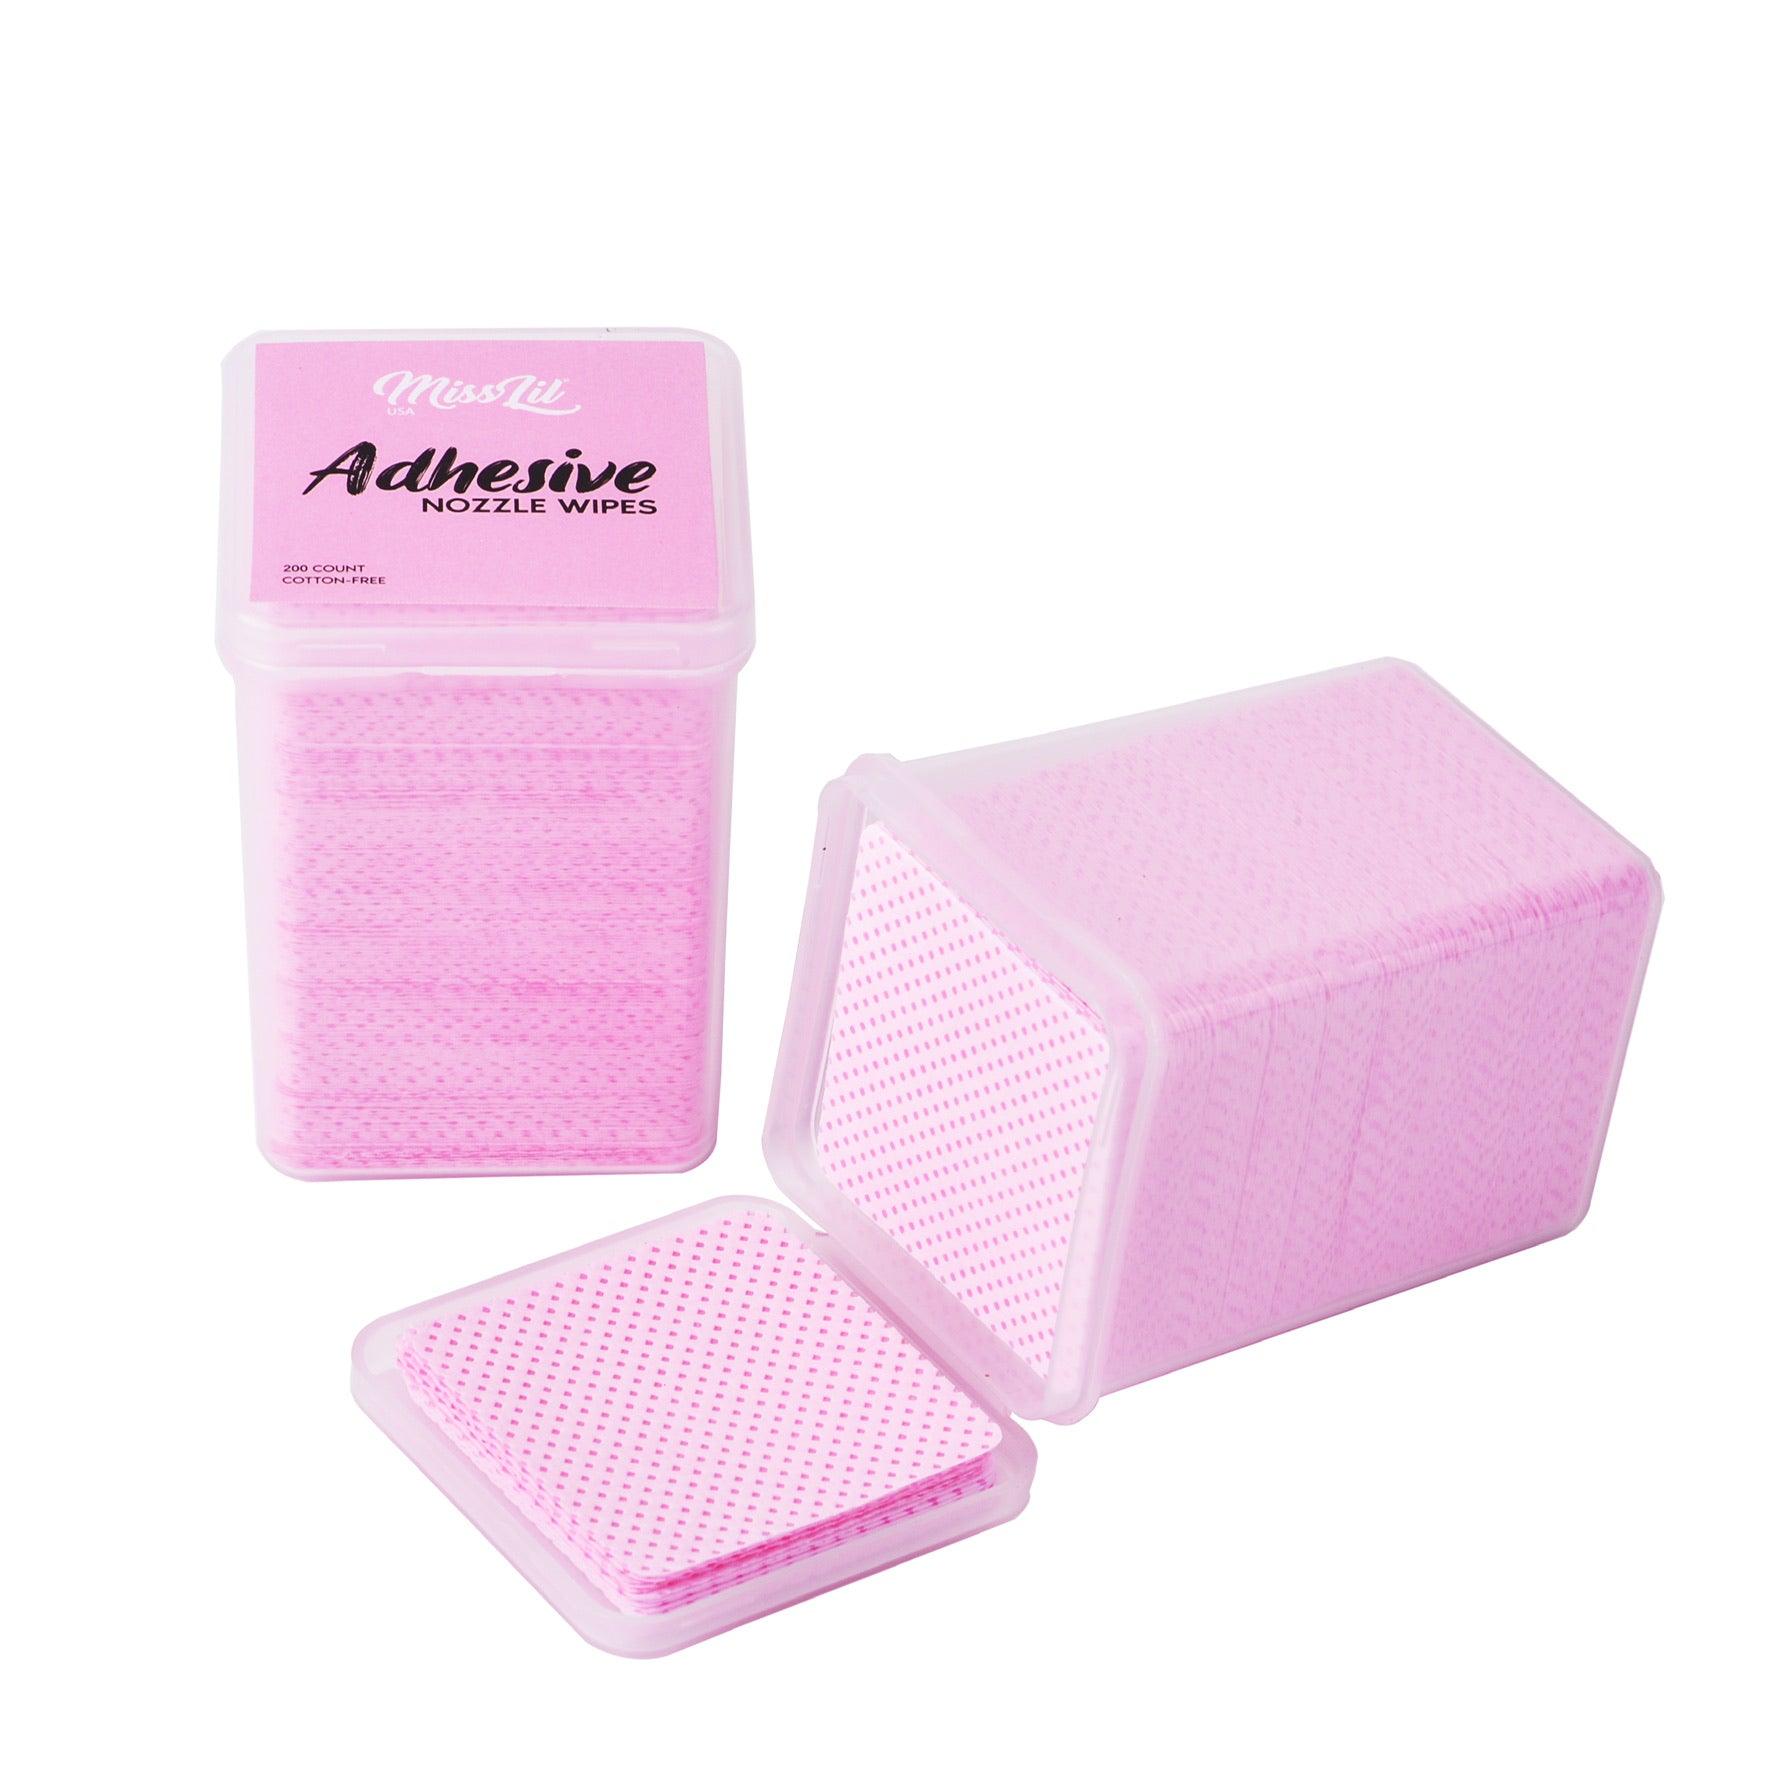 Adhesive Nozzle Wipes 200 Pcs (Pack of 12) - Miss Lil USA Wholesale